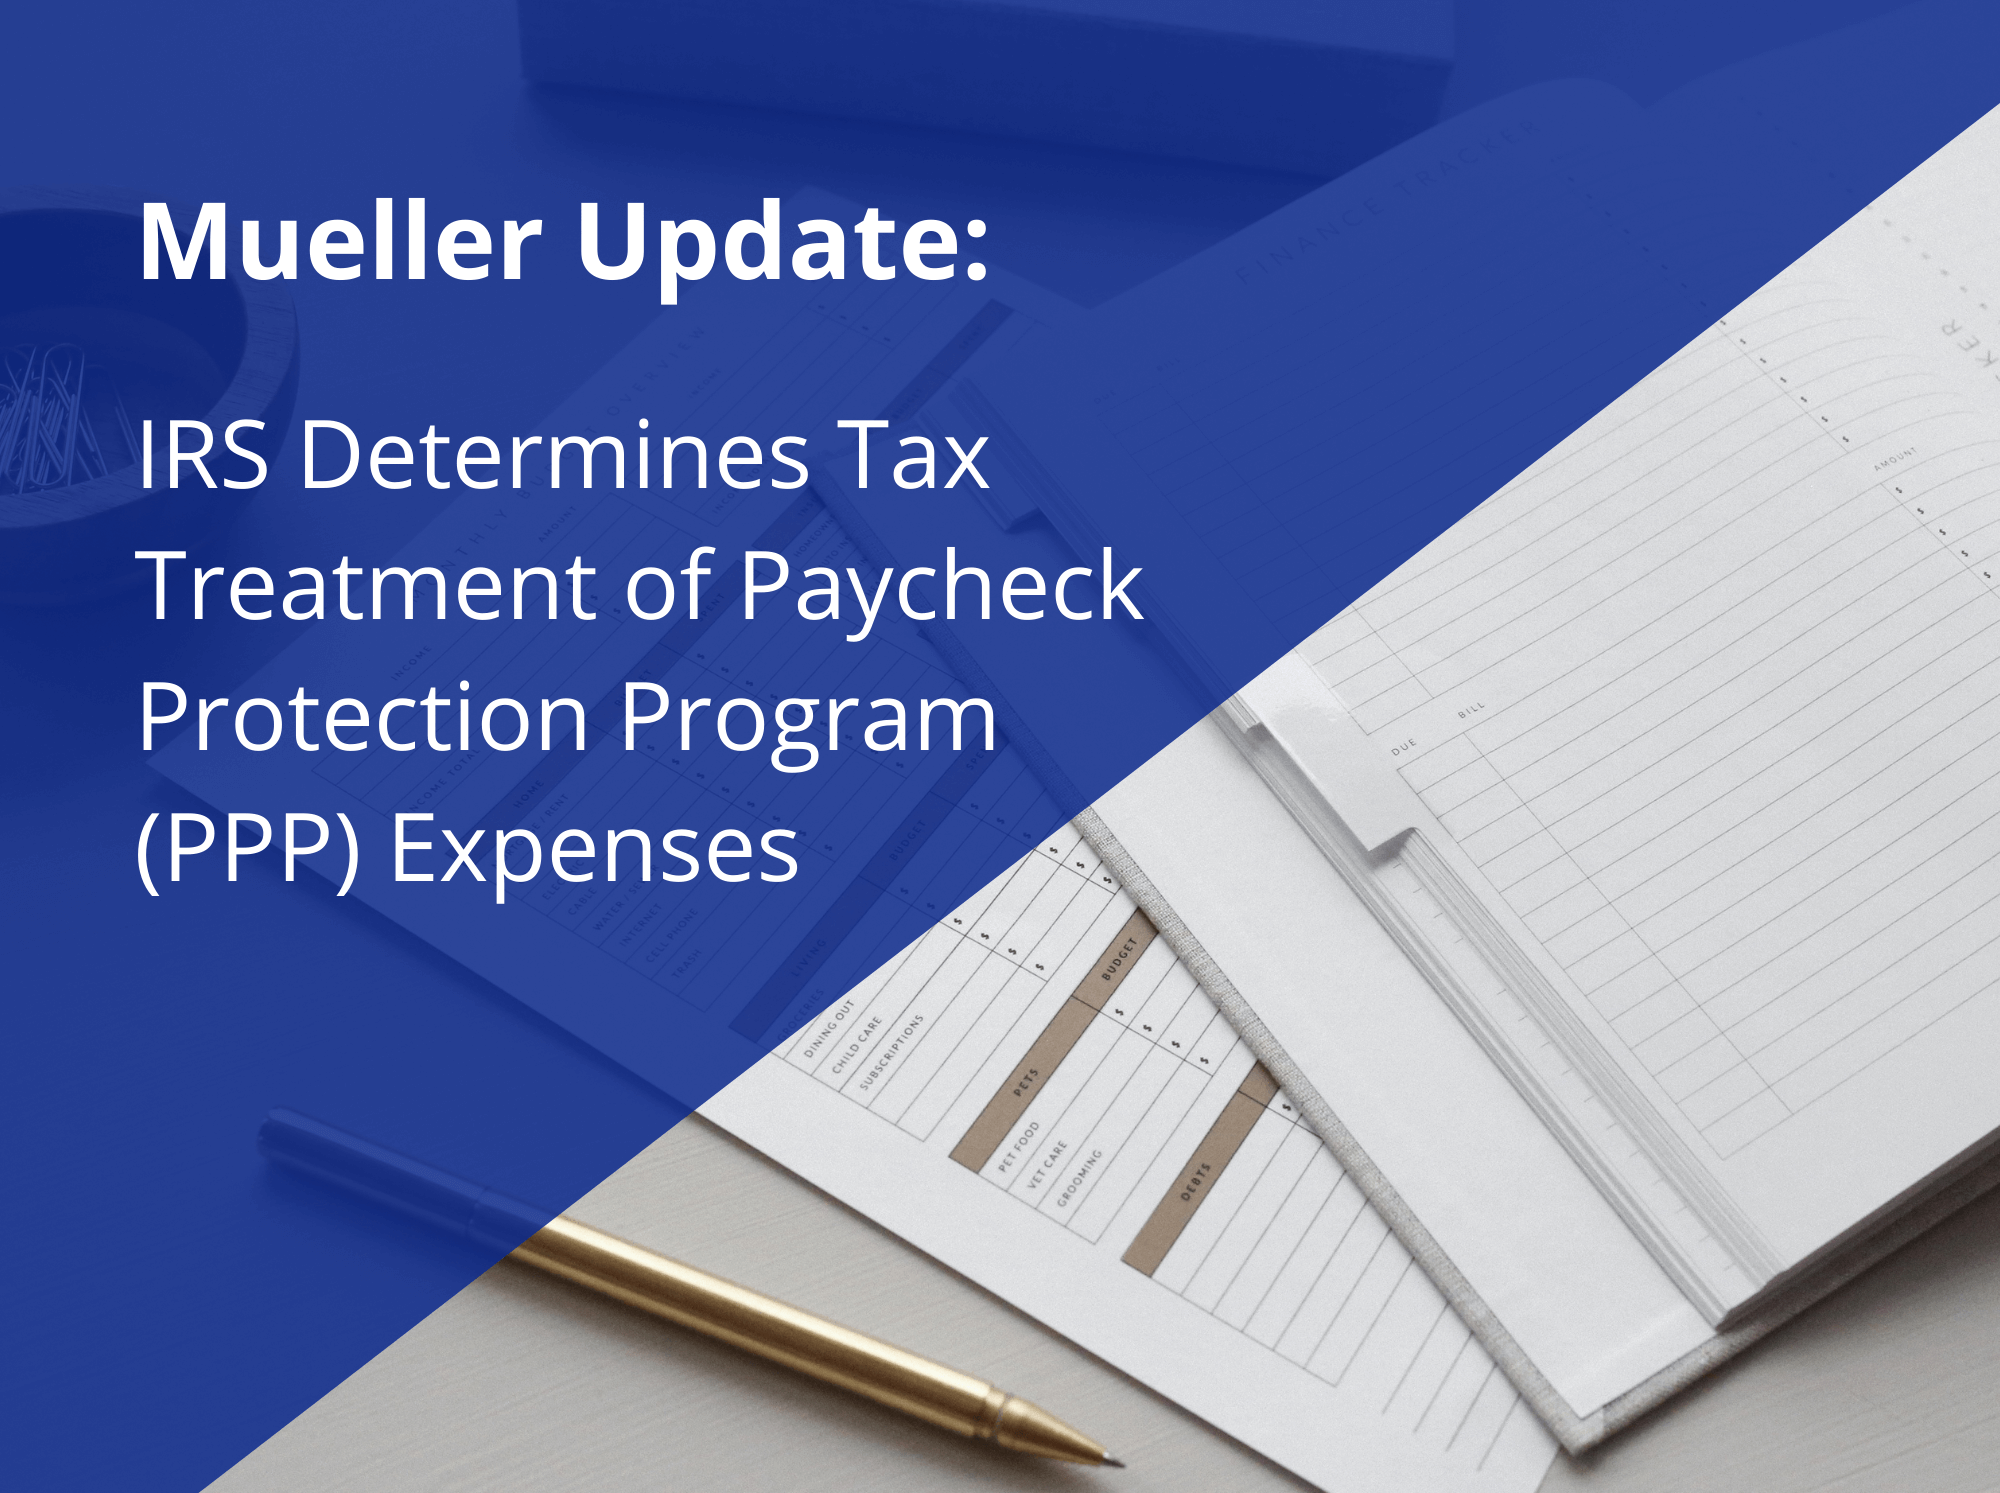 IRS Determines Tax Treatment of Paycheck Protection Program (PPP) Expenses